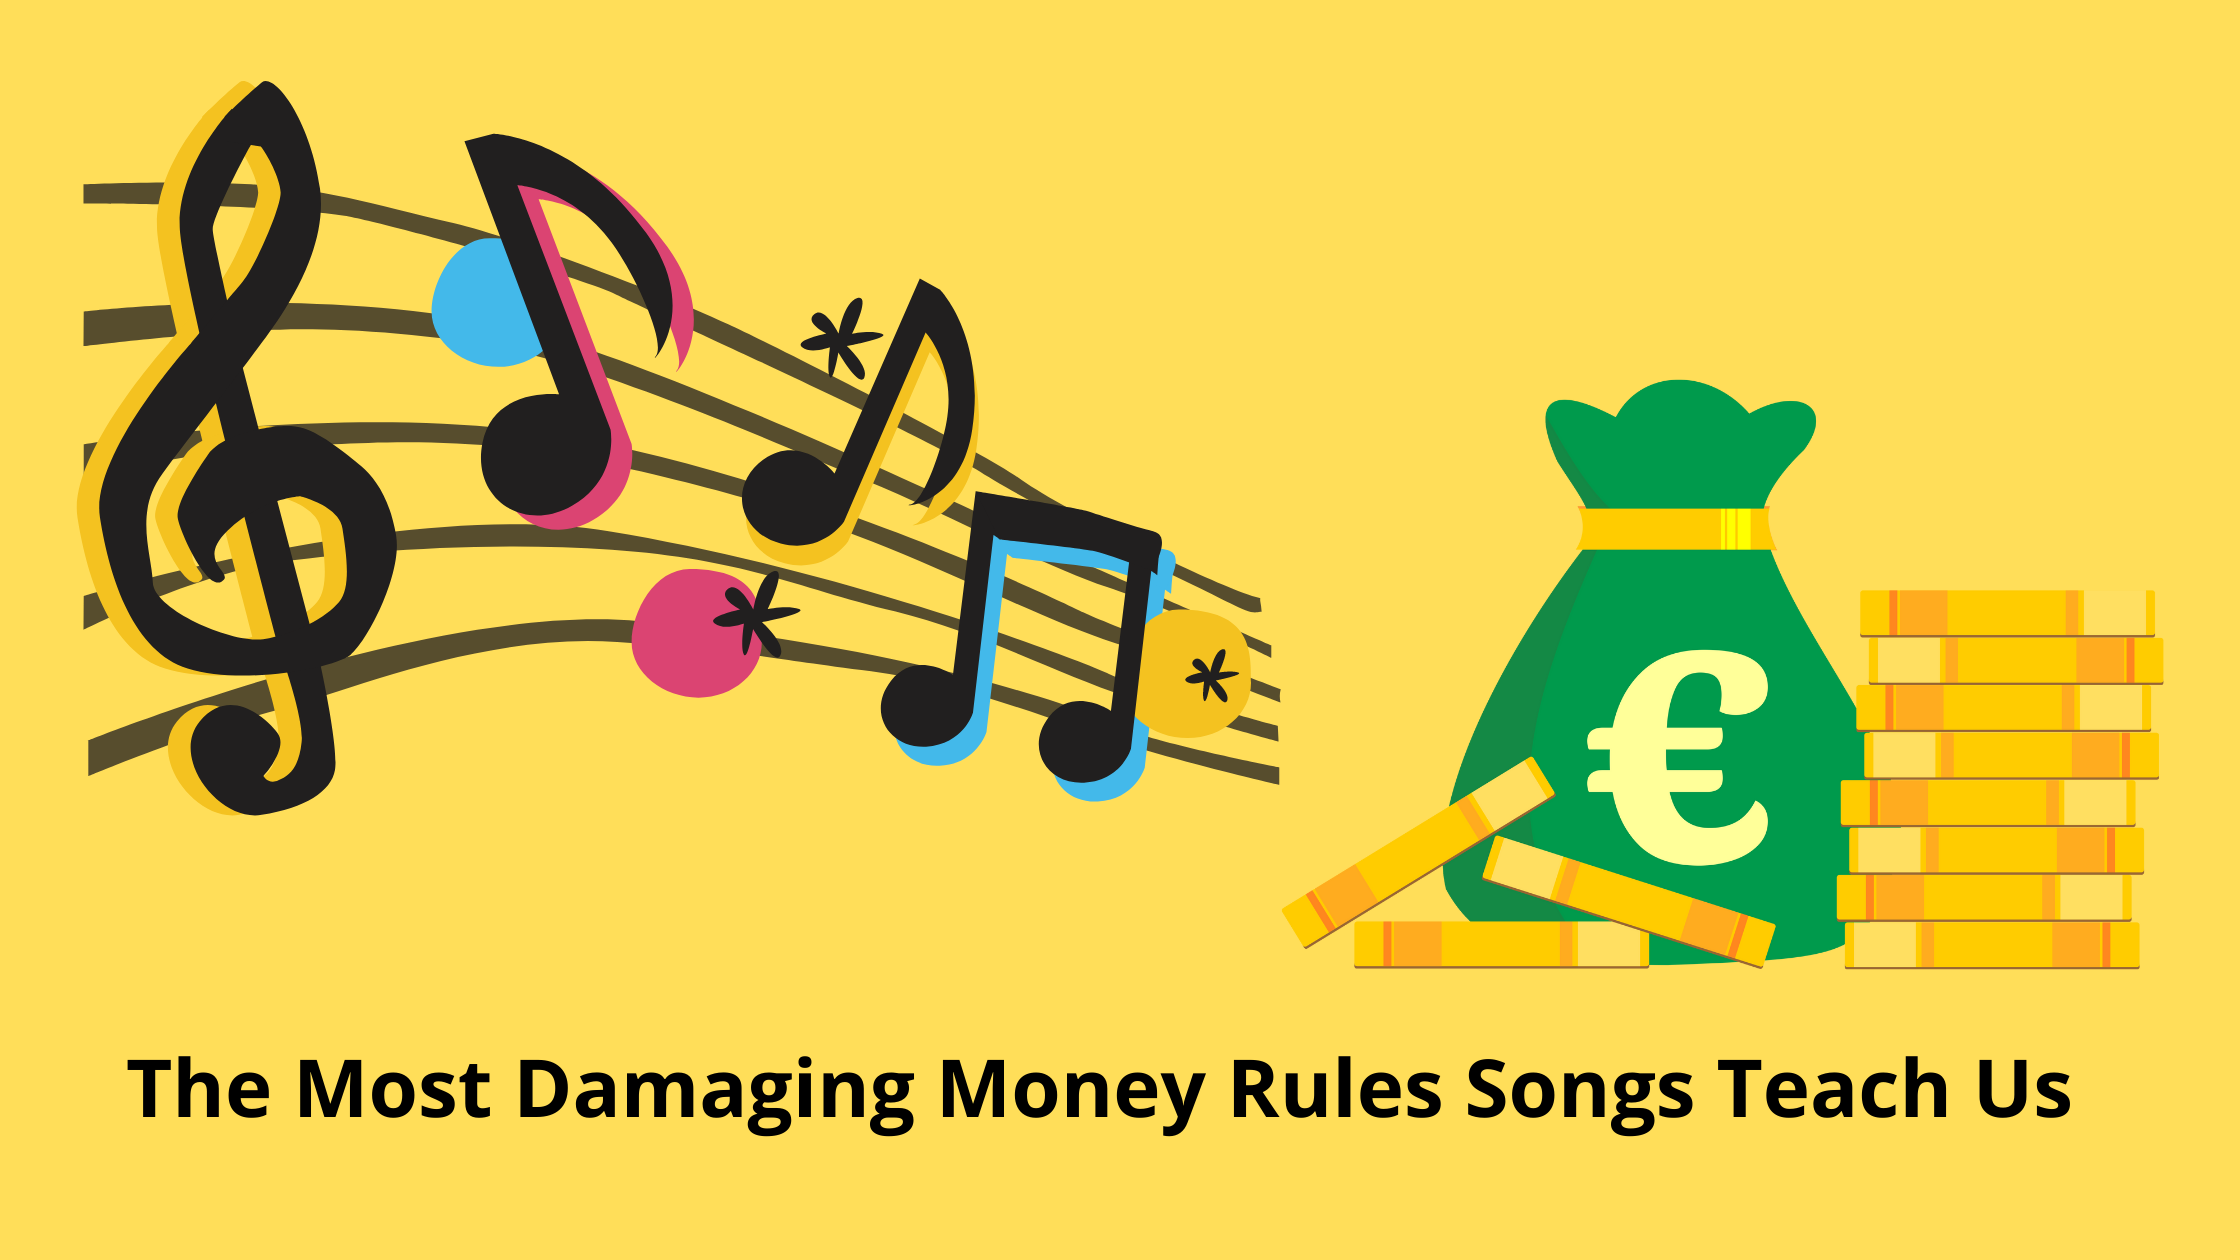 The Most Damaging Money Rules Songs Teach Us